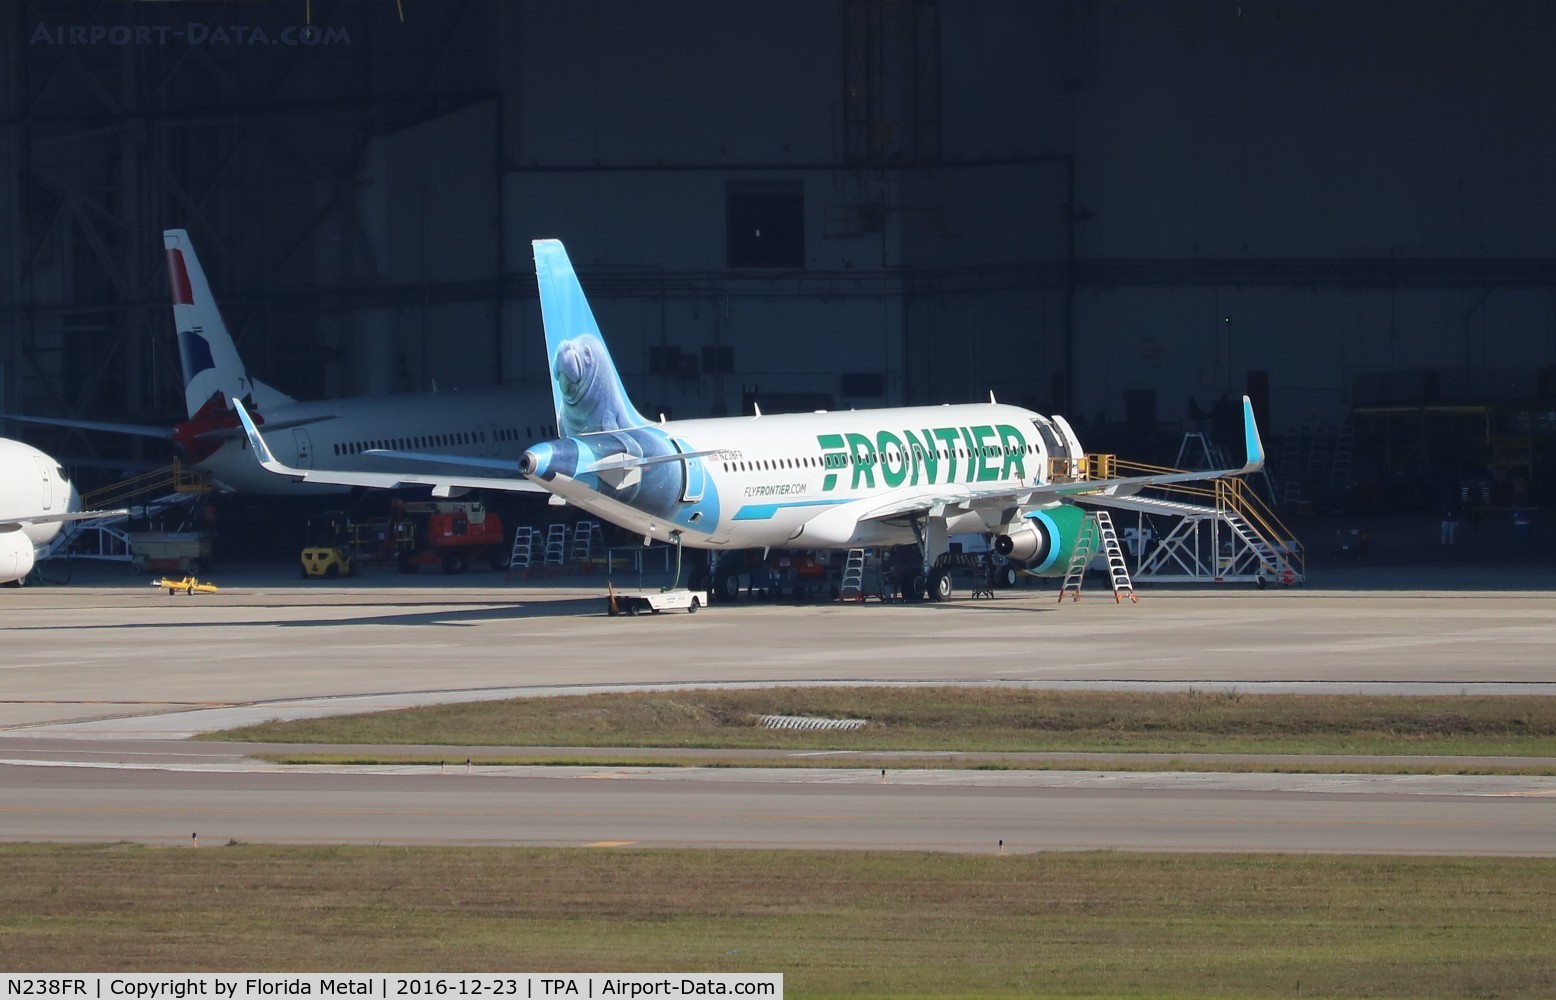 N238FR, 2016 Airbus A320-214 C/N 7458, Hugh the Manatee just delivered the day before this pic was taken.  Aircraft not in service yet at time of this posting, getting prepped at Tampa